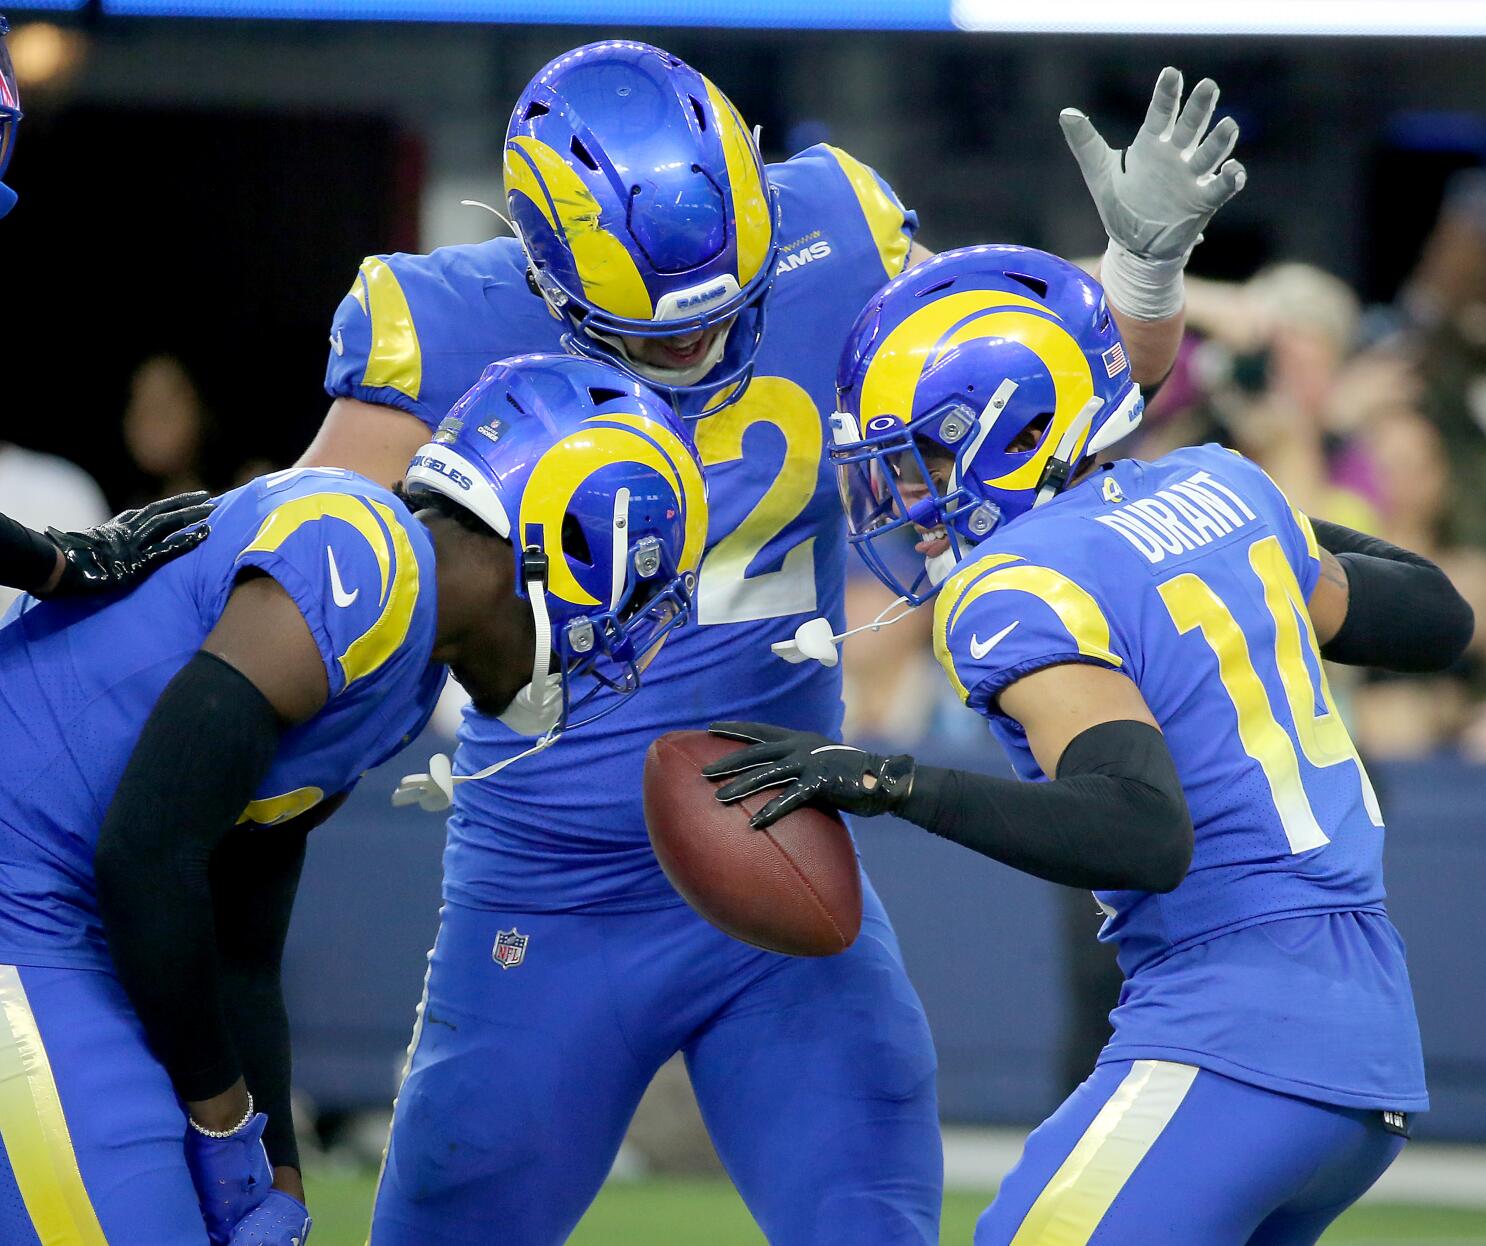 NFL: Lots of fans crushed the Los Angeles Chargers' bright uniforms